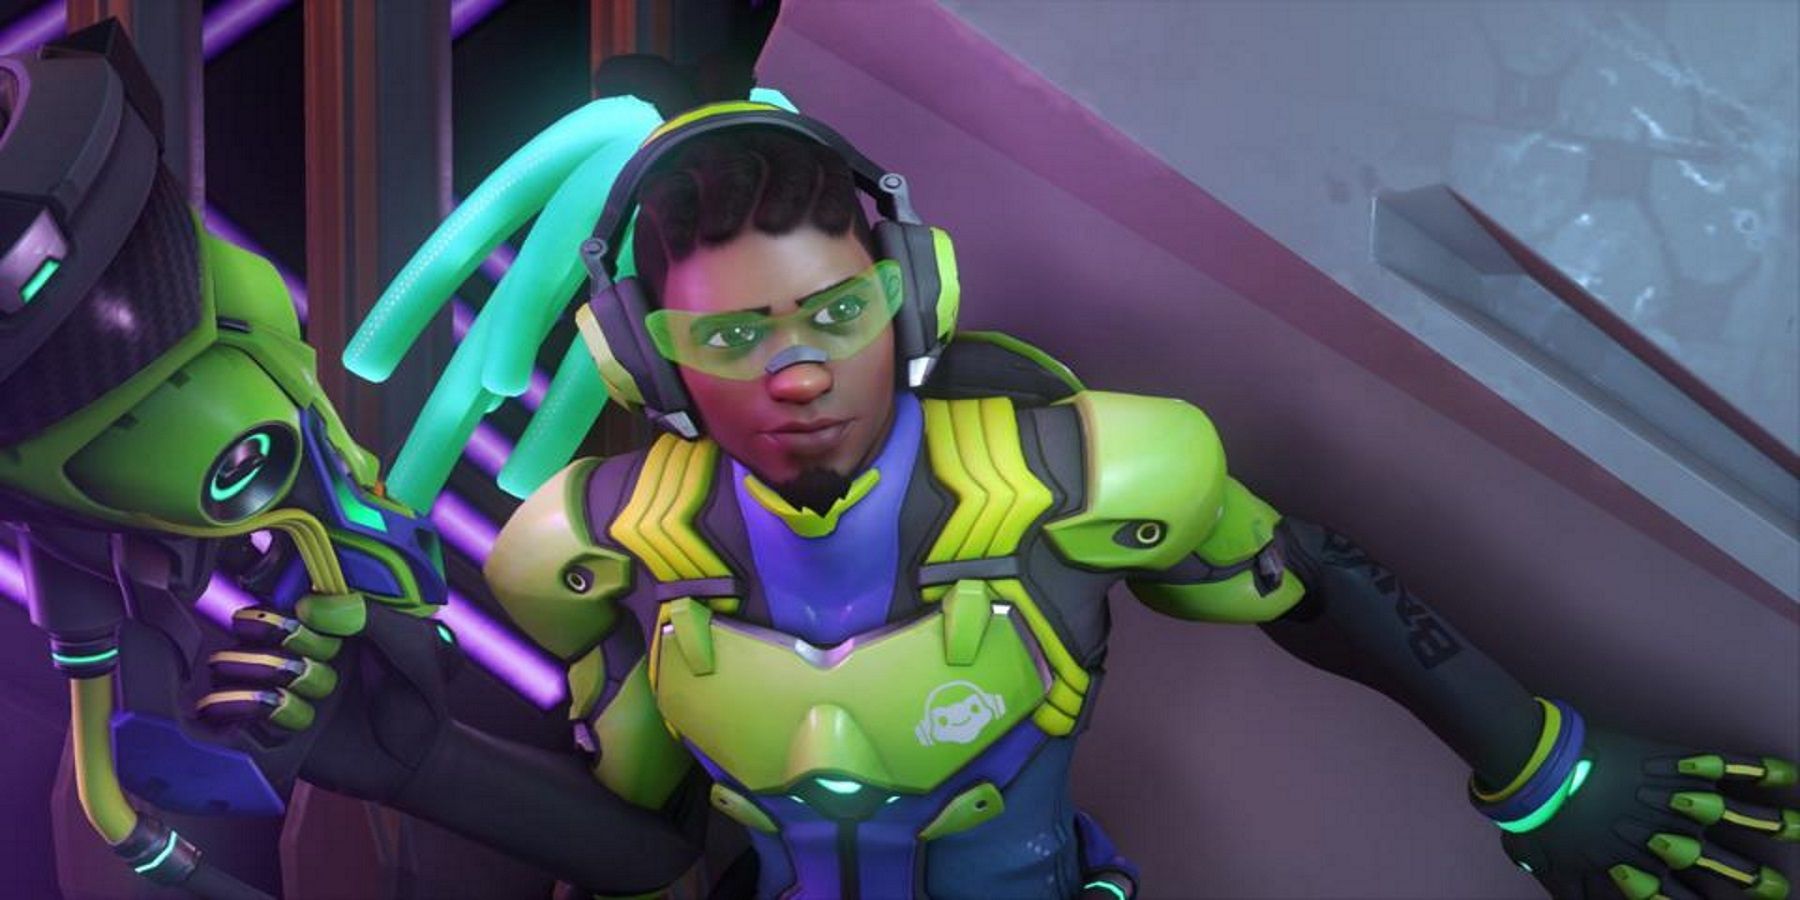 A Lucio player's quick thinking along with a bit of luck beats out a Roadhog in Overwatch 2 match.